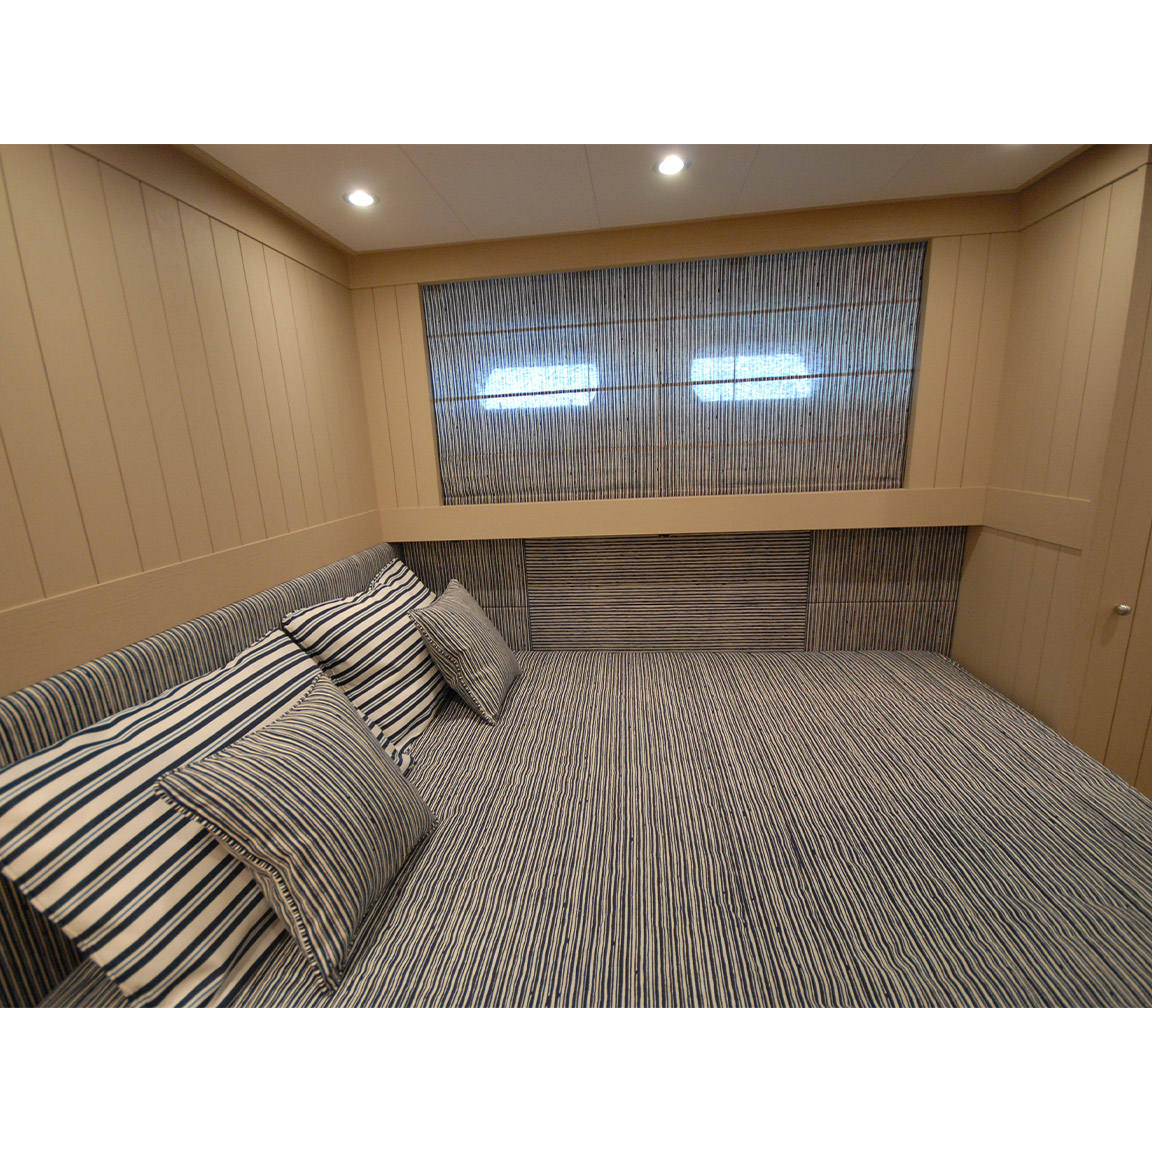 striped double bed and curtain